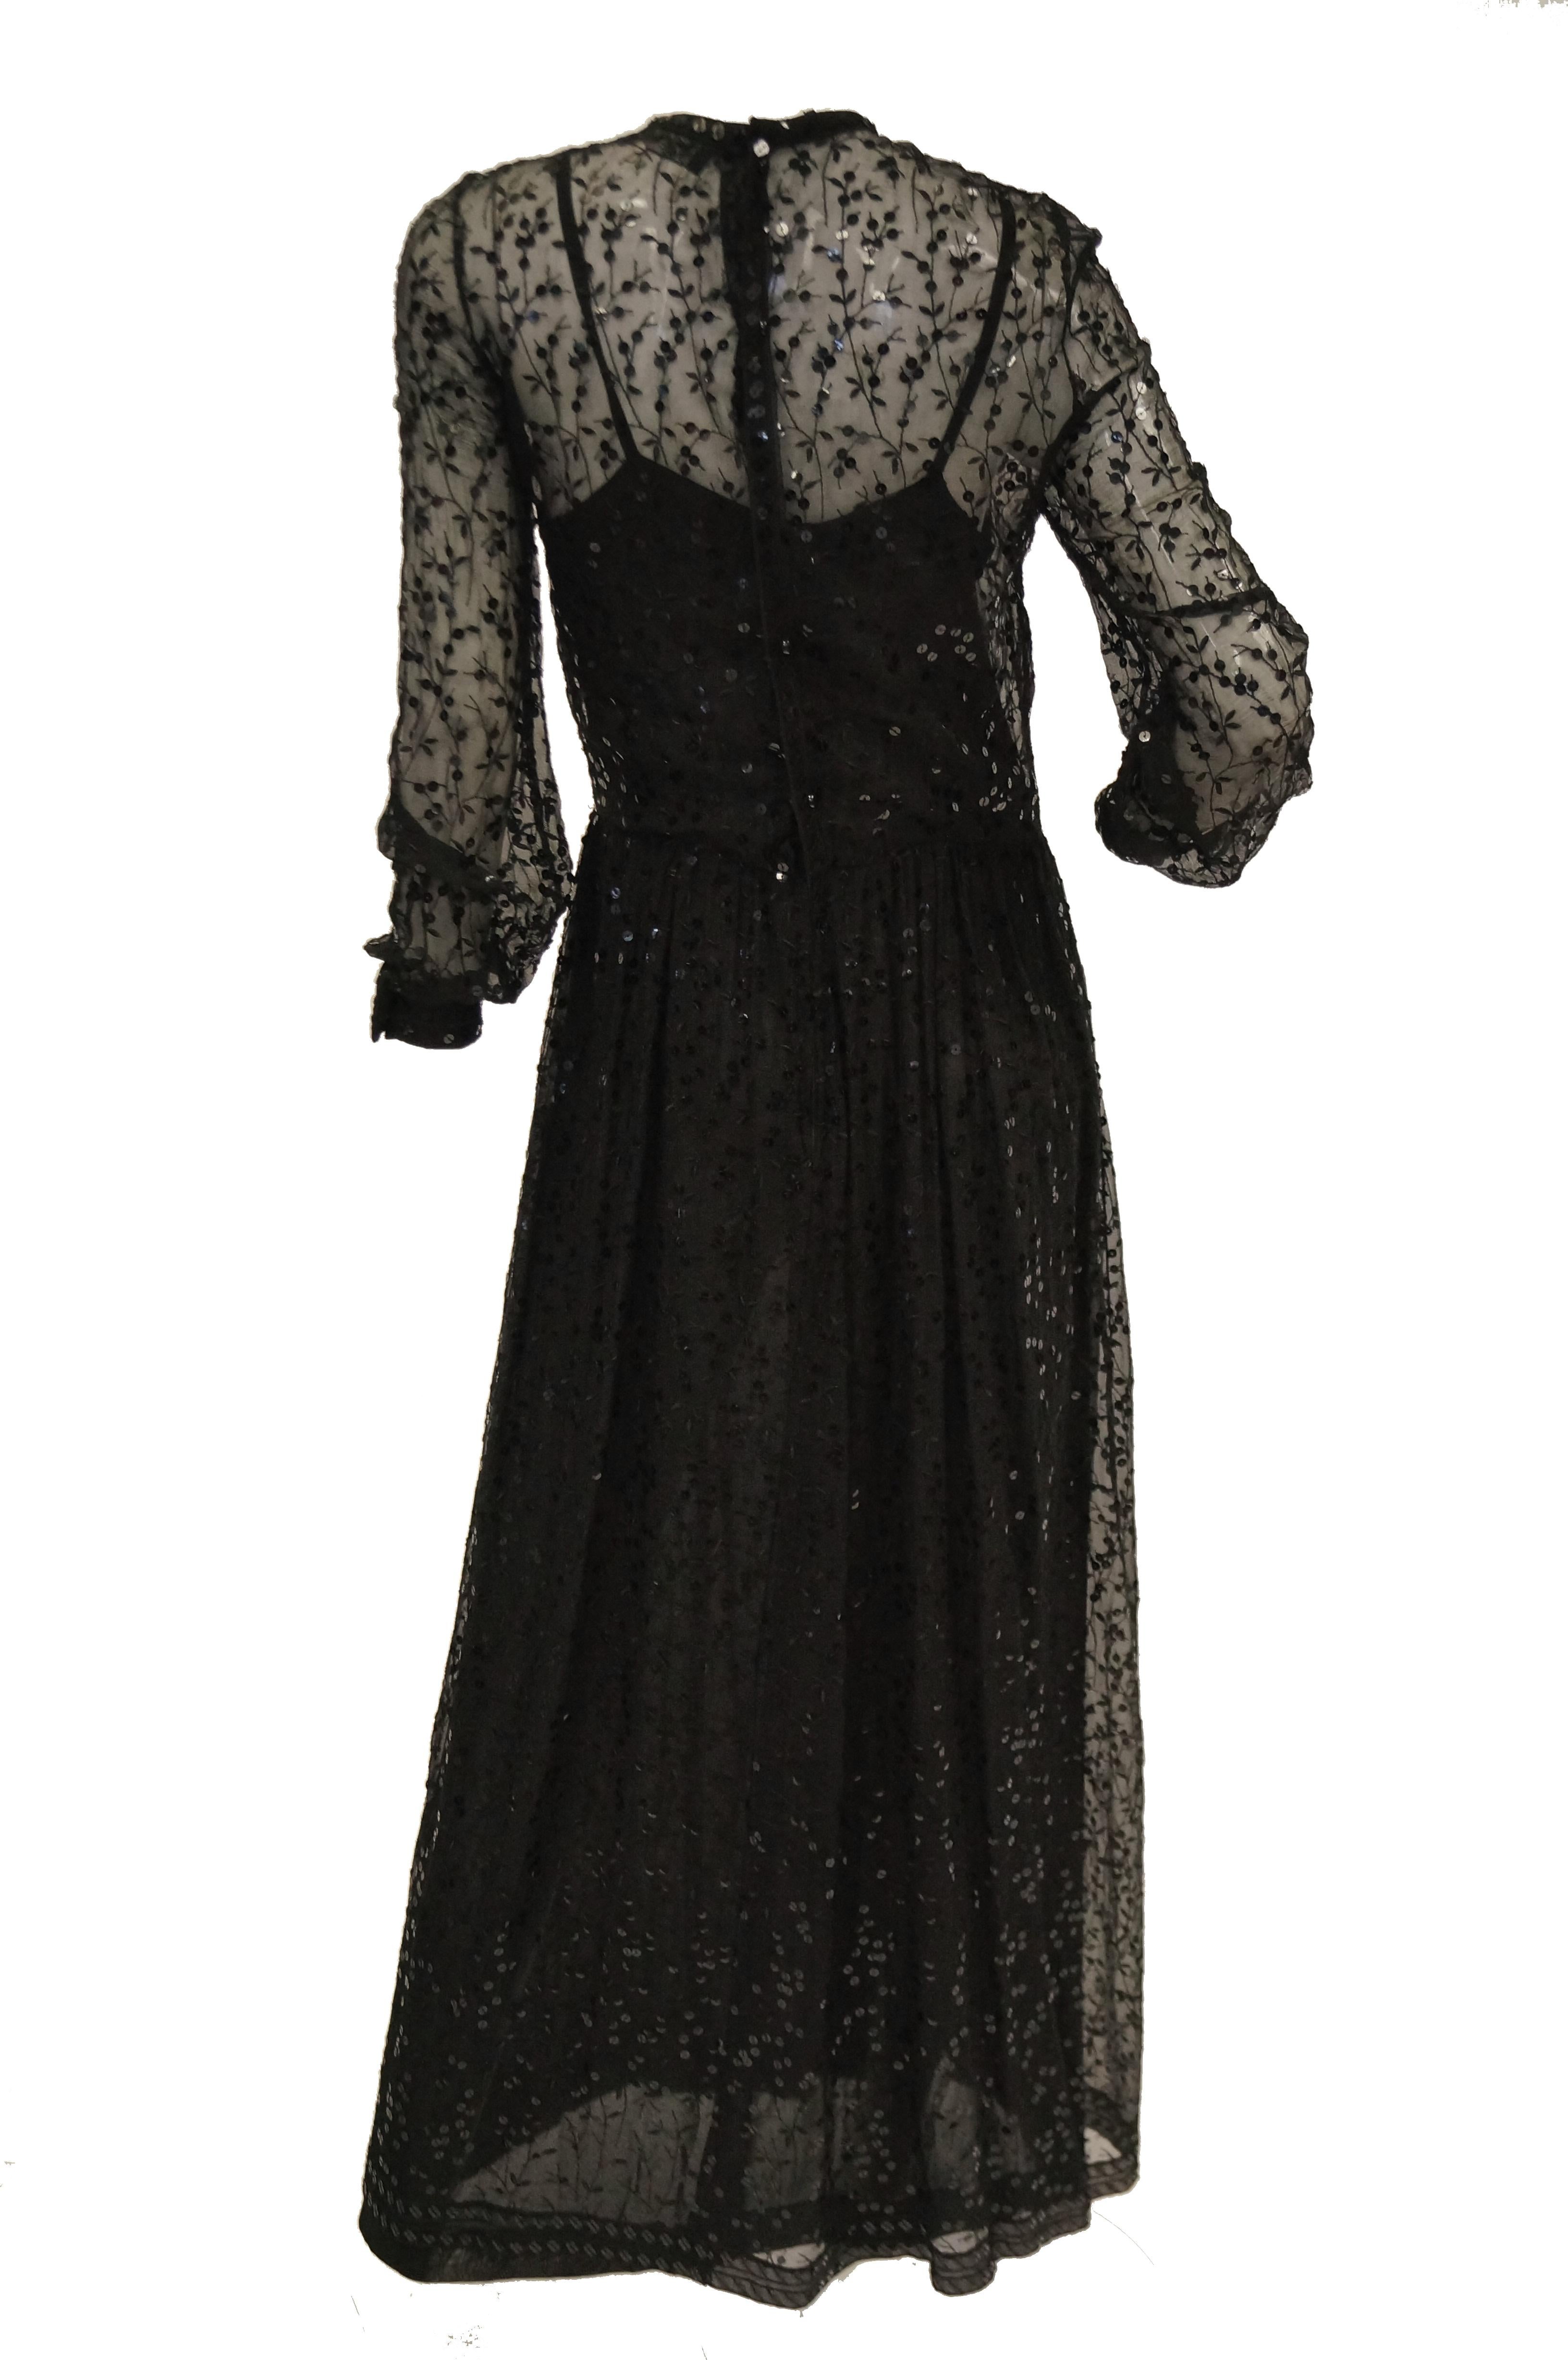 Women's 1980s Chanel Sheer Black Silk Evening Dress with Floral Embroidery and Sequins